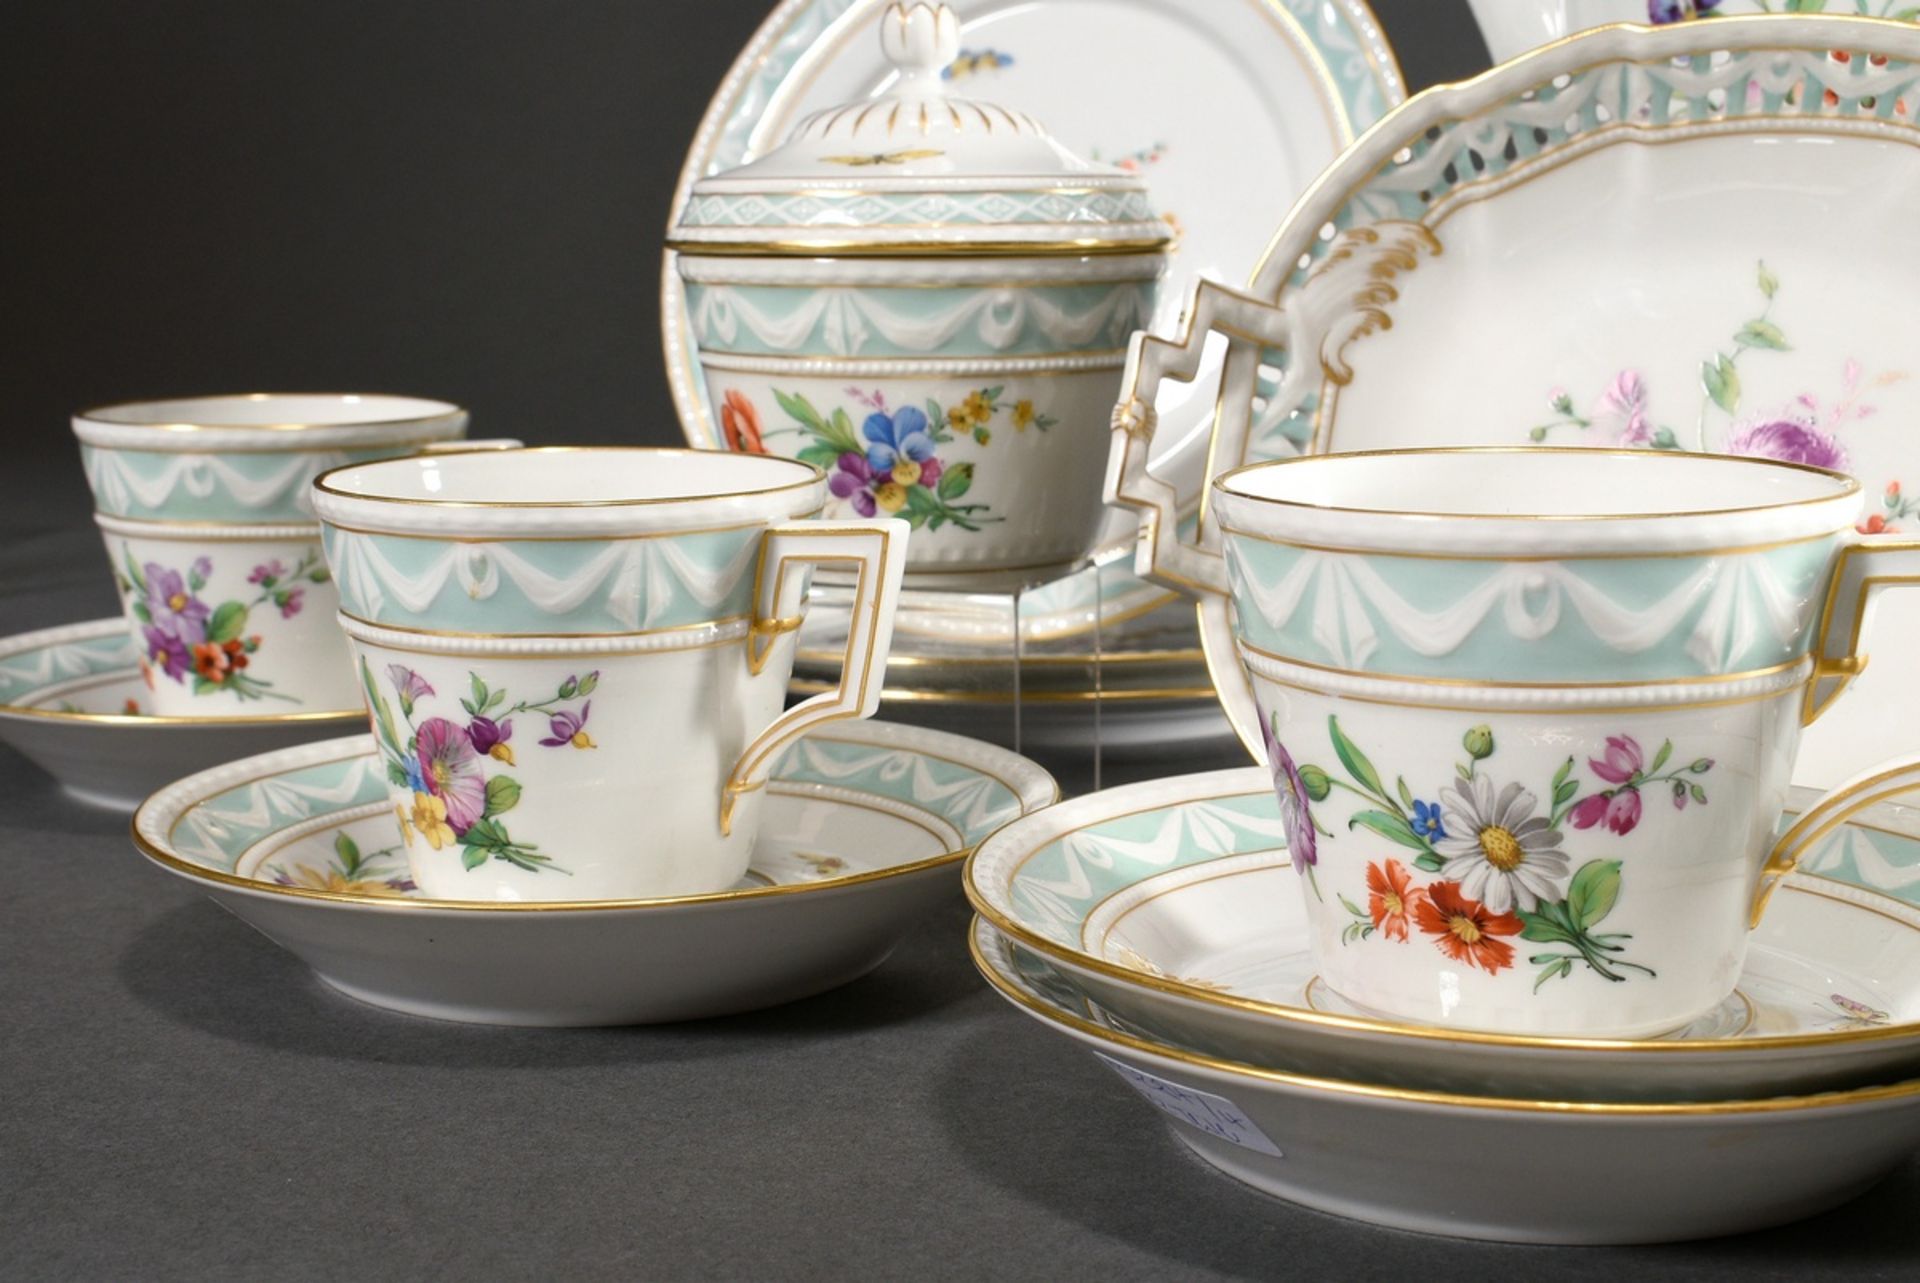 15 Pieces KPM coffee service "Kurland" with flowers and insects, gold staffage and turquoise frieze - Image 6 of 10